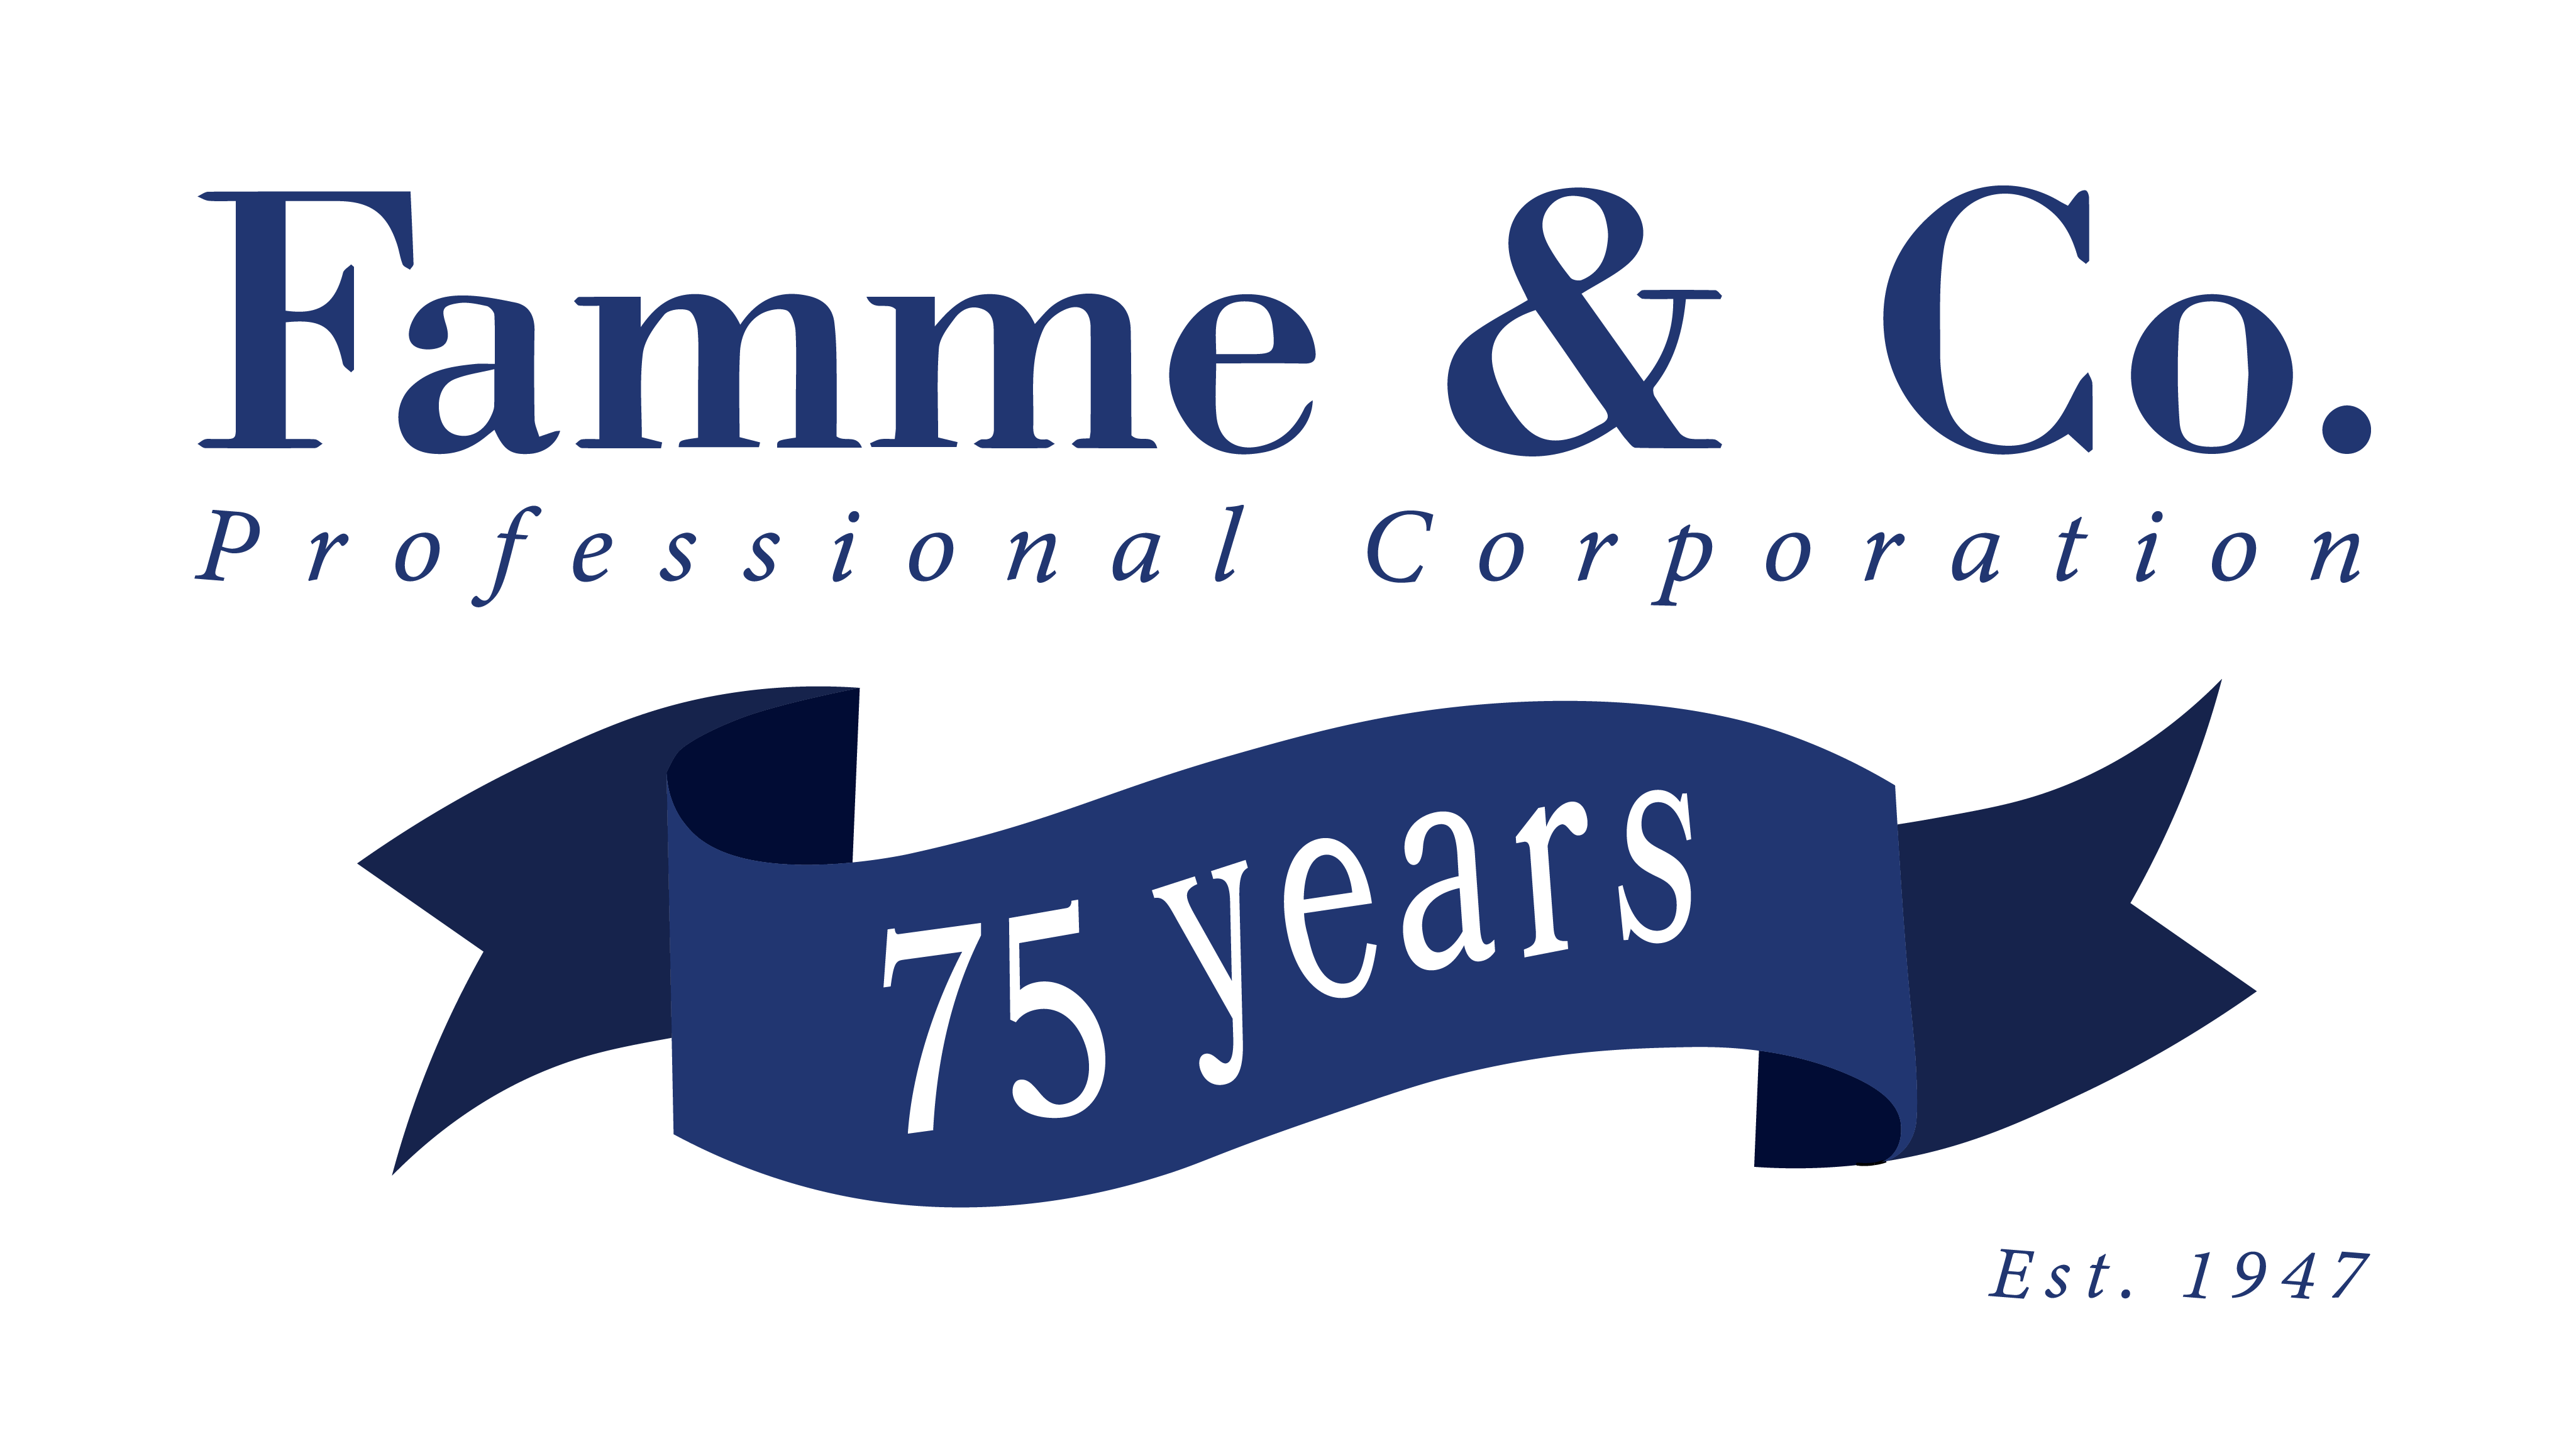 Famme & Co. Chartered Professional Accountants 75th Anniversary logo and banner to celebrate many years of service.